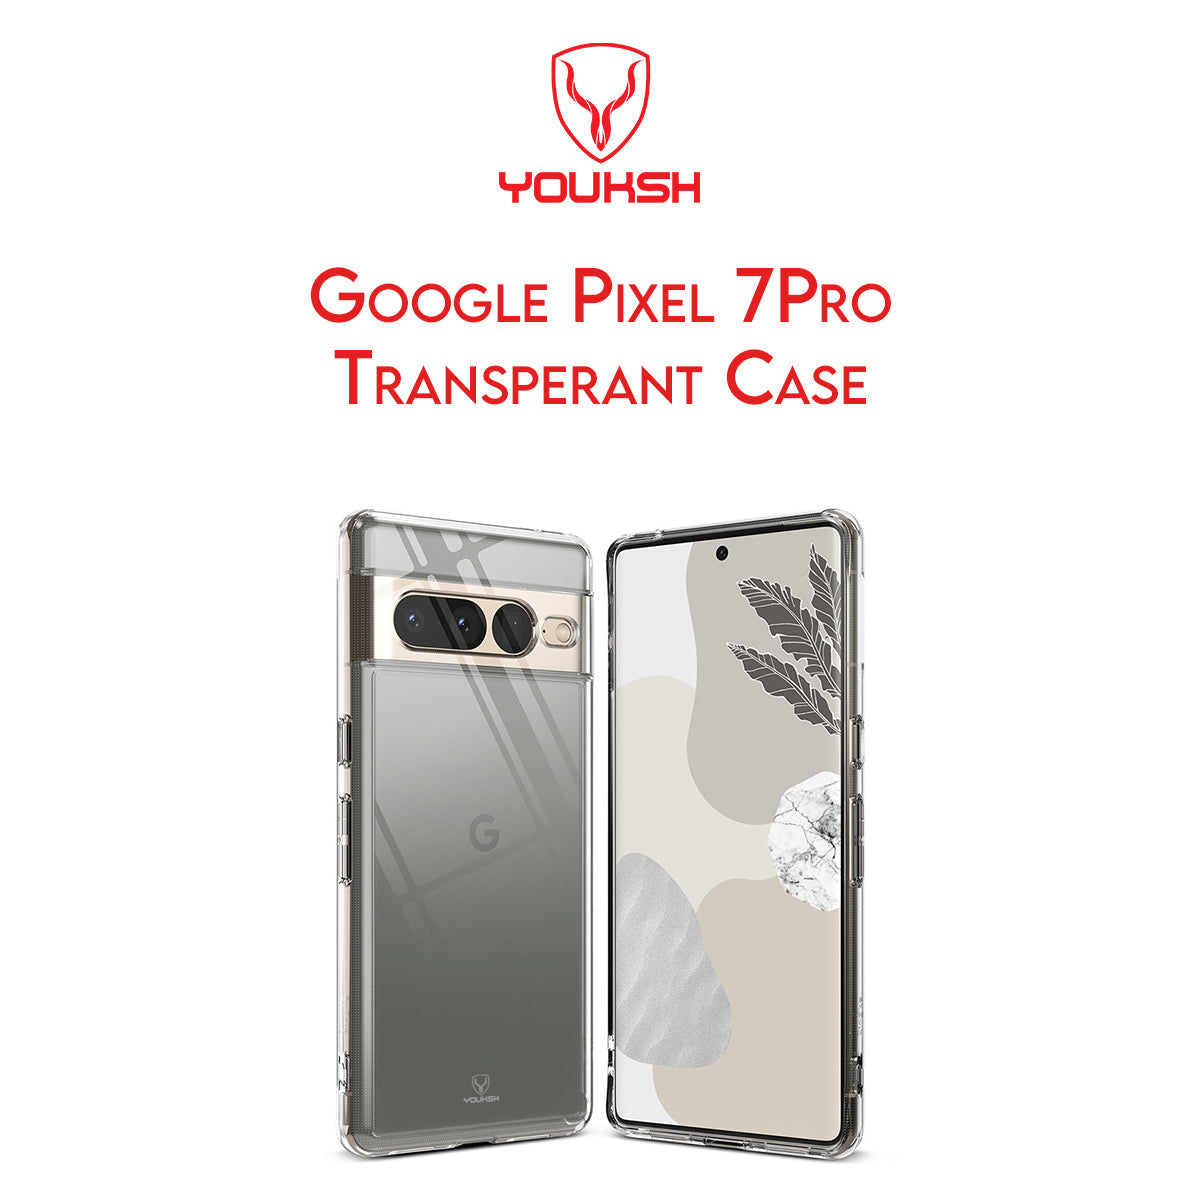 YOUKSH Google Pixel 7 Pro Transparent Cover - Google Pixel 7 Pro Transparent Jelly Back Cover - Google Pixel 7 Pro Soft Shock Proof Transparent Back Pouch - Google Pixel 7 Pro Crystal Clear Cover - Google Pixel 7 Pro Silicone Cover.